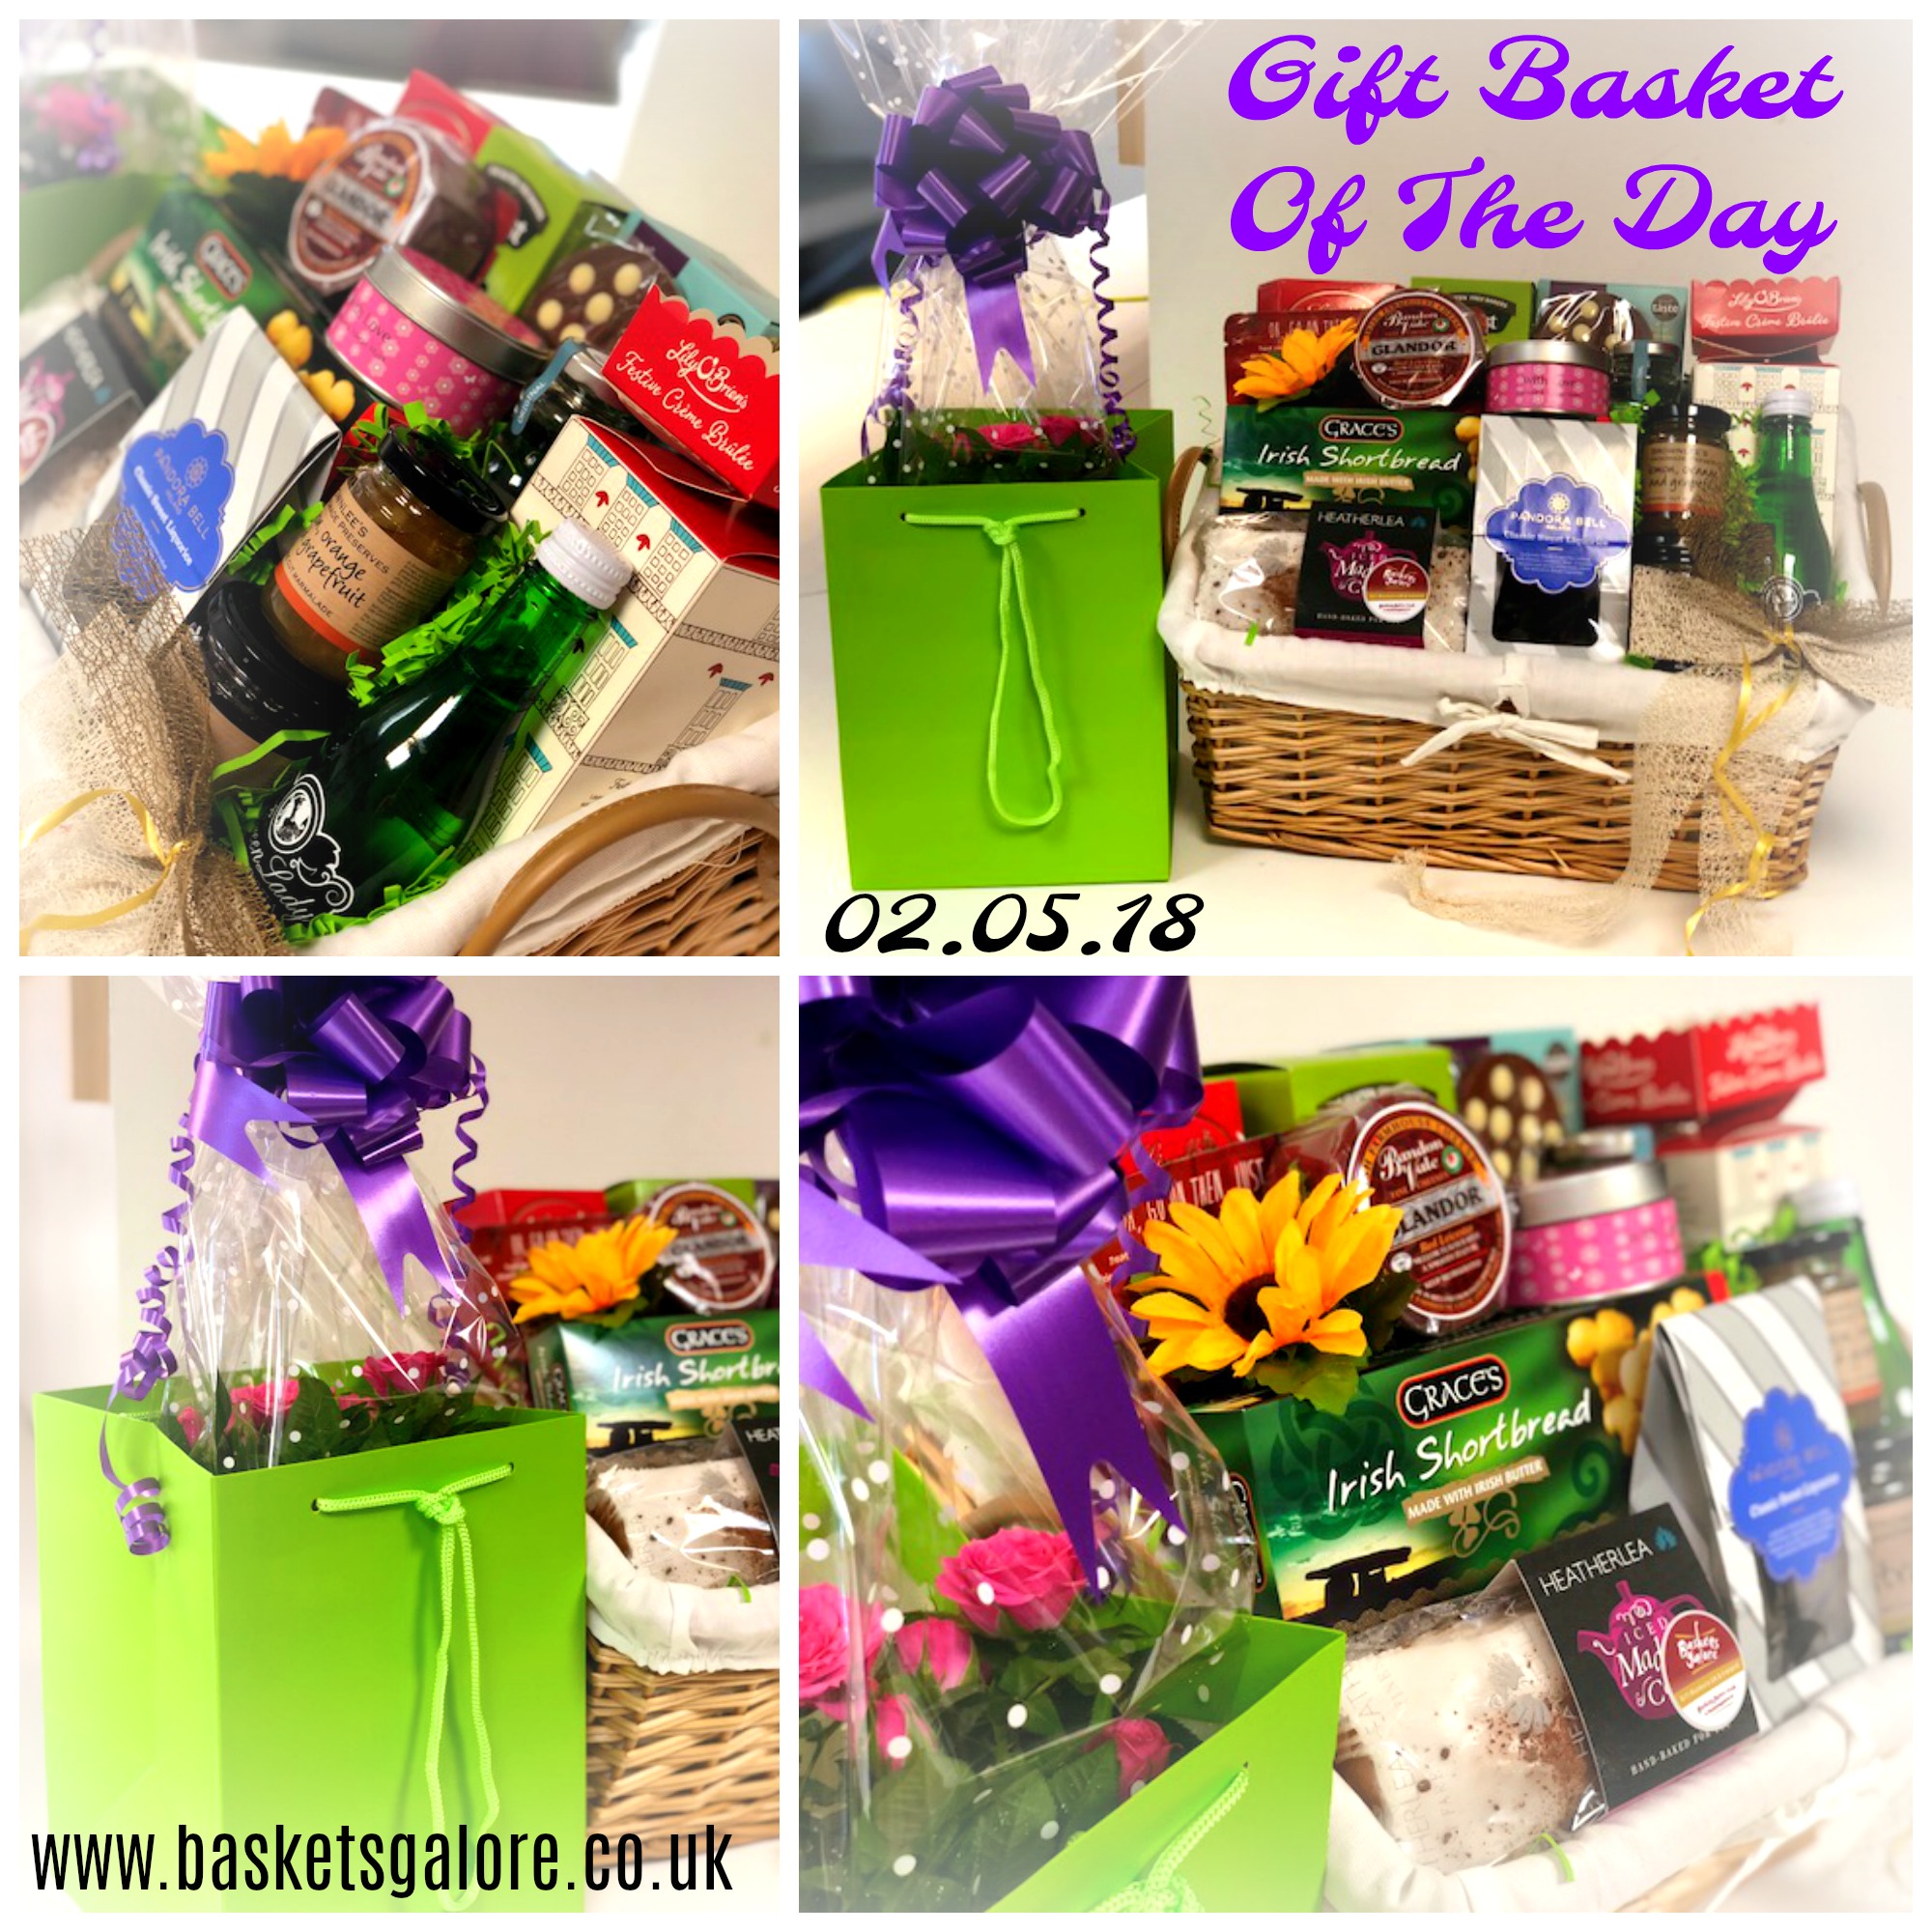 Baskets Galore’s Customer Gifts – Gift Basket of the Day 02.05.18